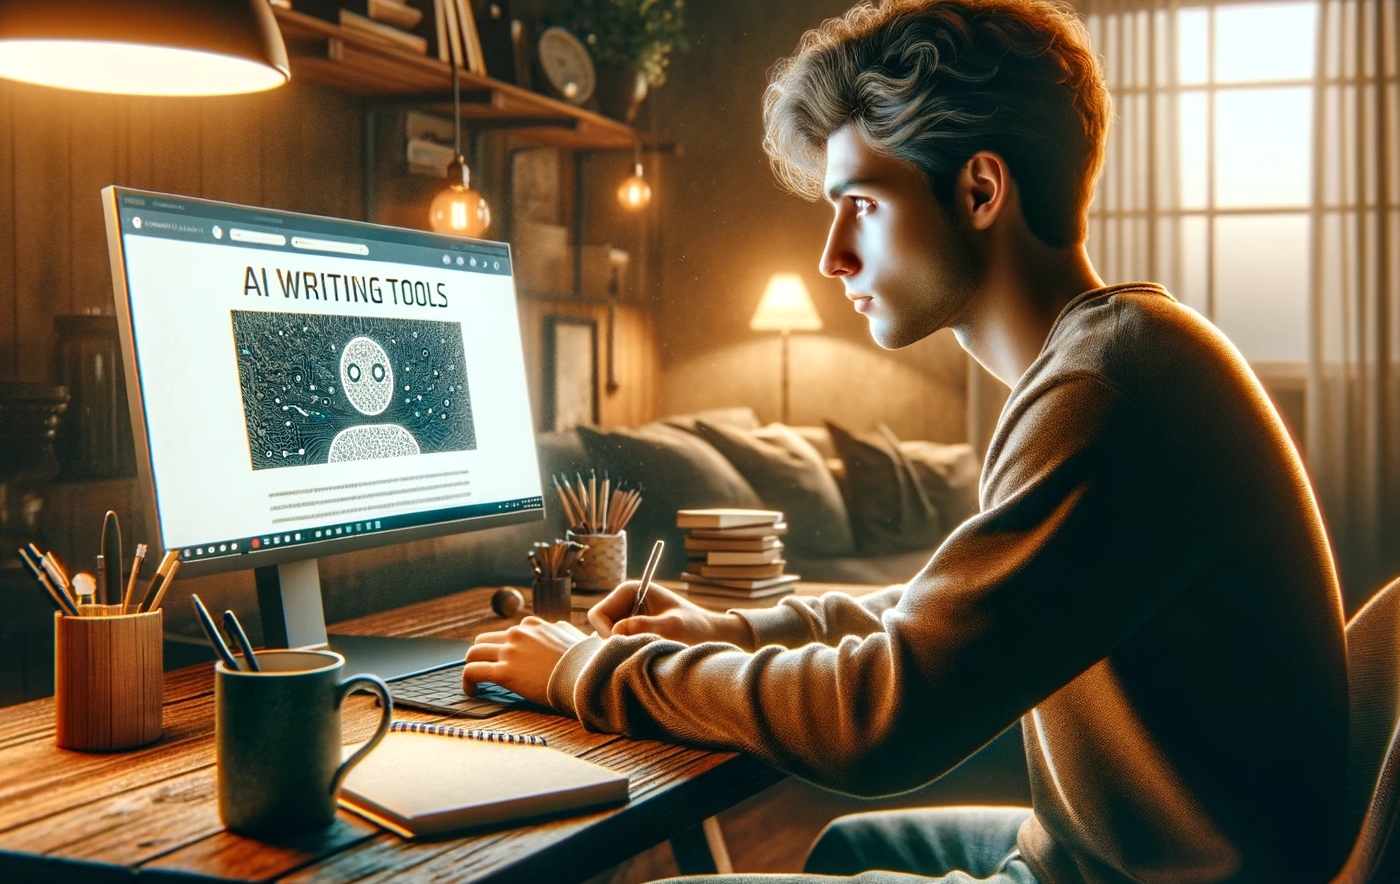 AI Writing Tools vs Human Writers: Which is Better?